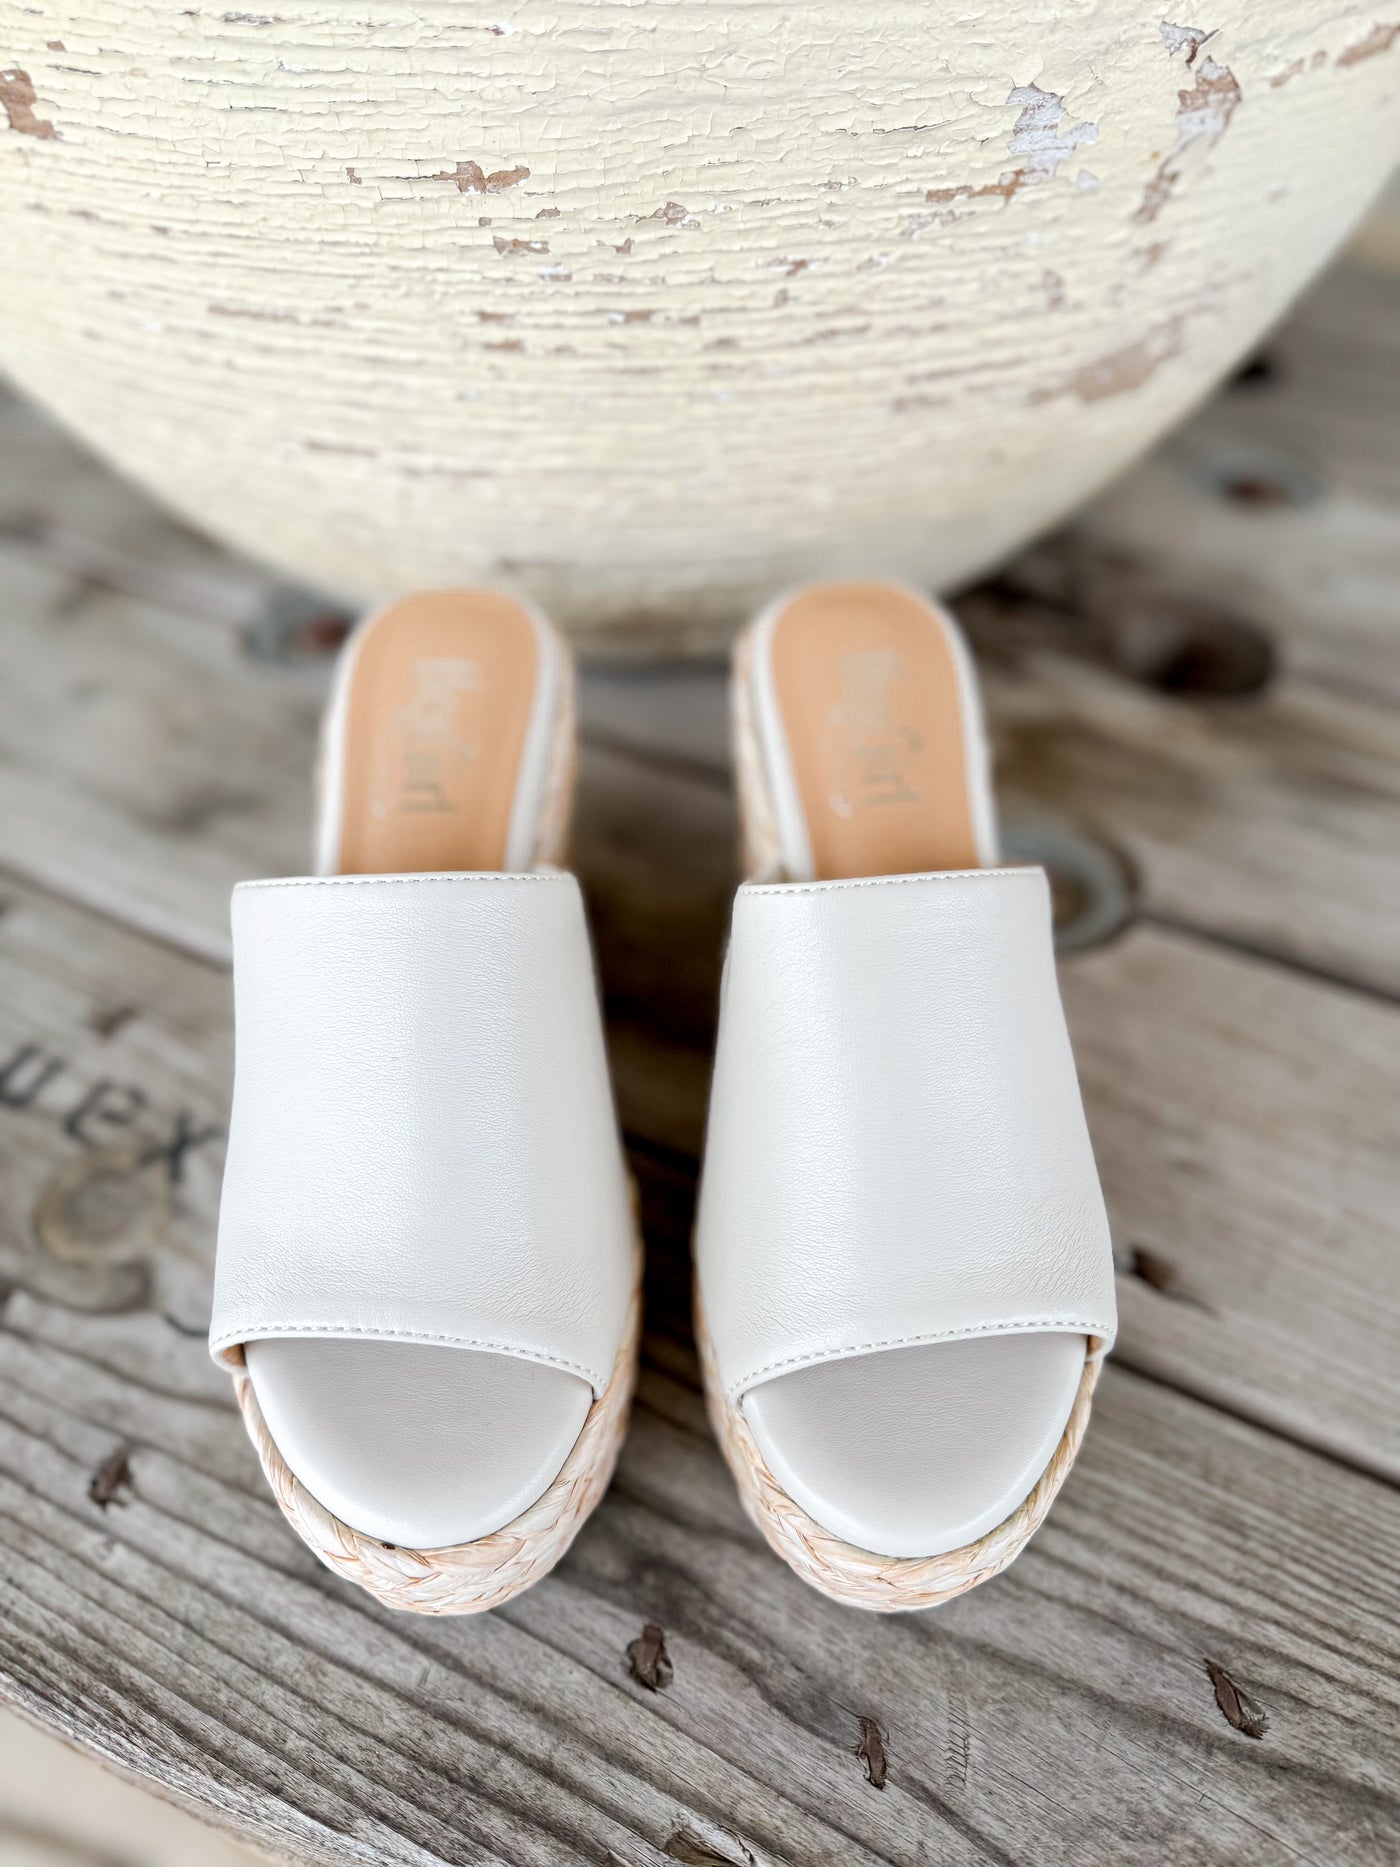 Corky's Solstice - Ivory Wedge